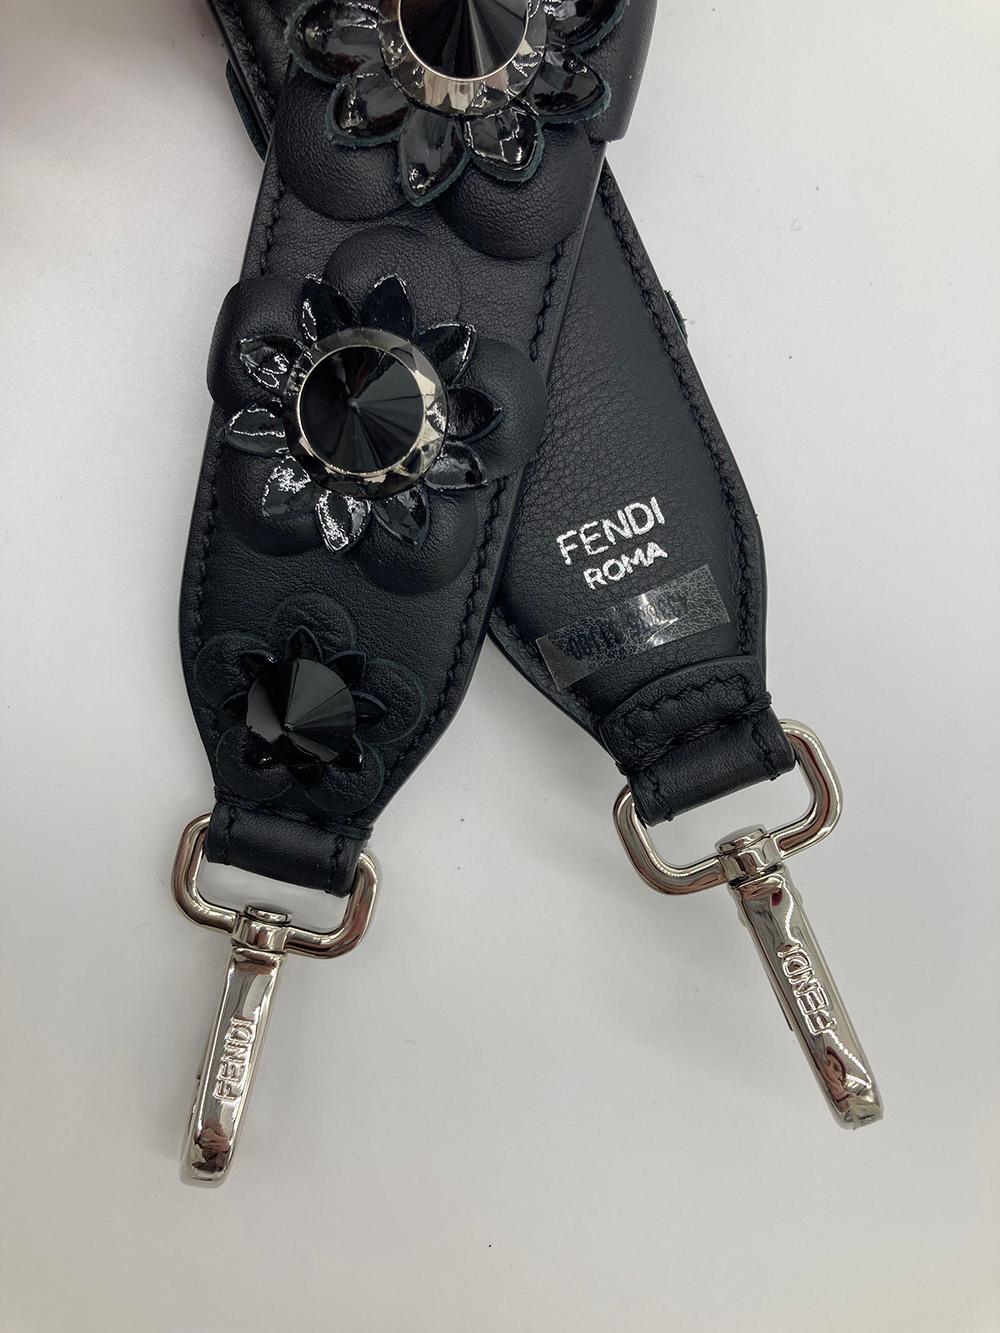 Fendi Black Leather Flowerland Strap in new without tag condition. Black leather padded strap with silver hardware. black embroidered leather flowers with two layers of petals. first layer features scalloped black leather while the top layer is